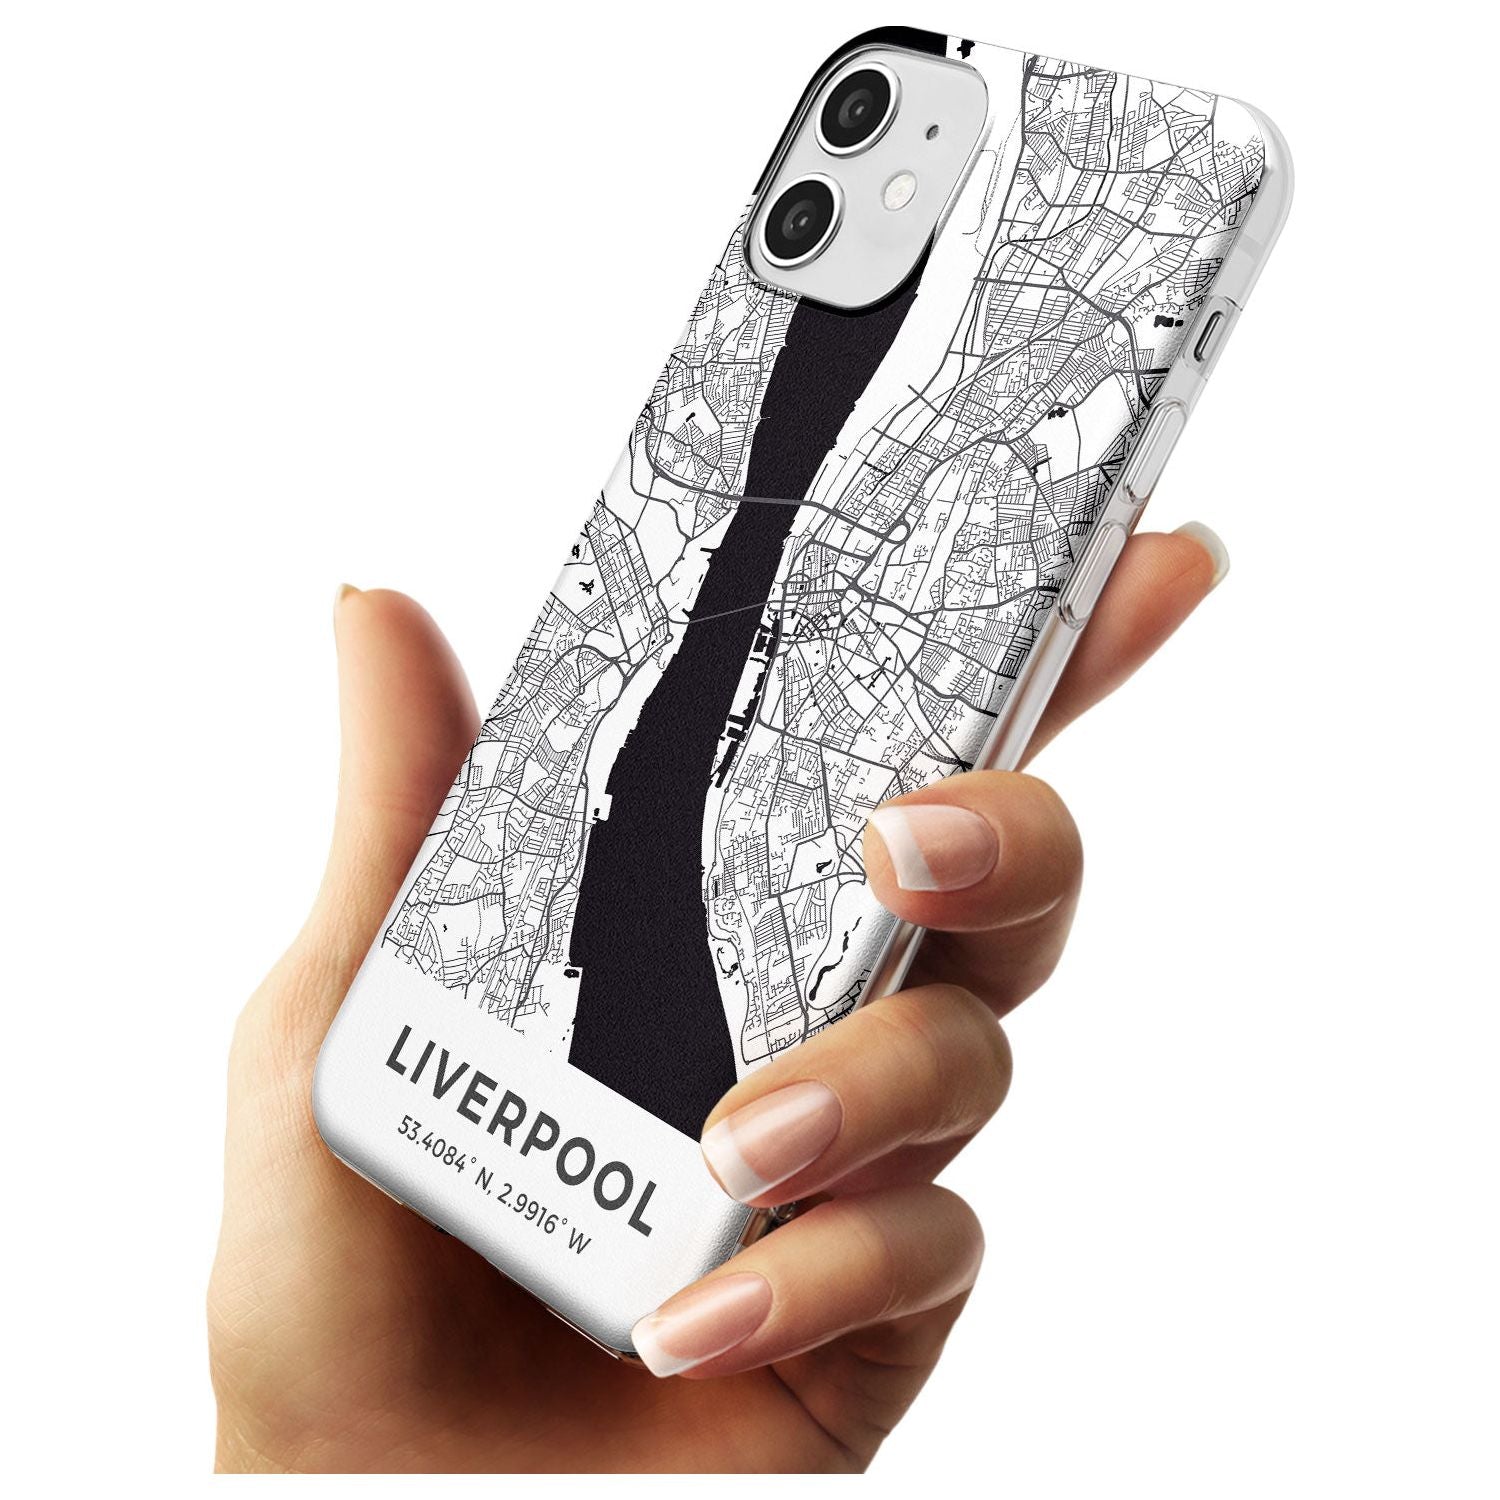 Map of Liverpool, England Slim TPU Phone Case for iPhone 11